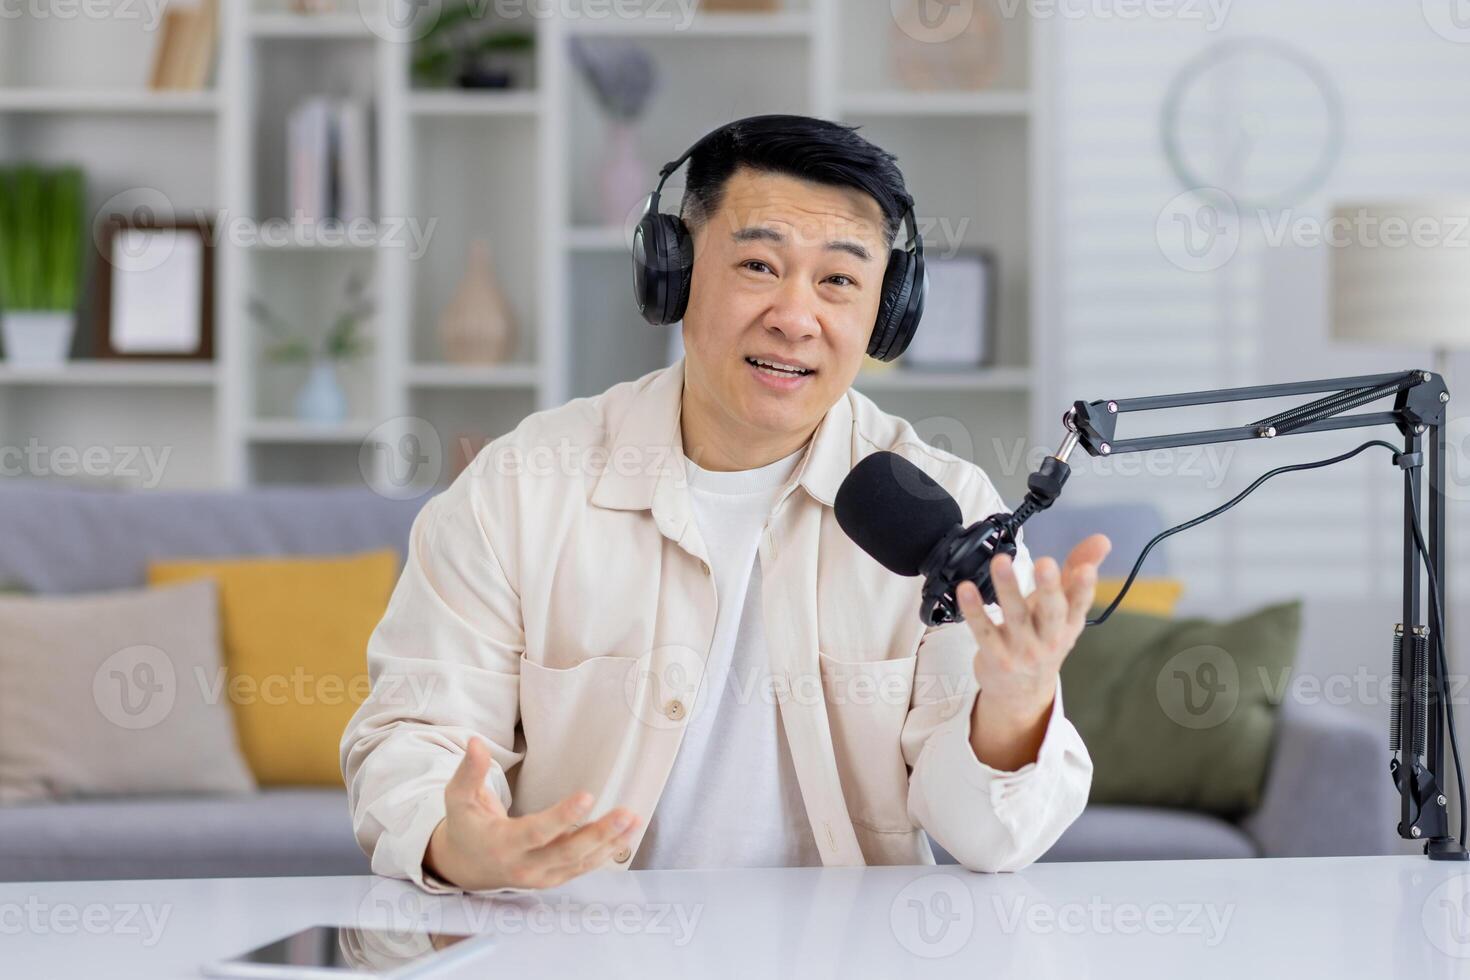 Friendly Asian man with headphones podcasting, talking and gesturing towards the camera with a broadcast microphone and a laptop in a home studio setting. photo